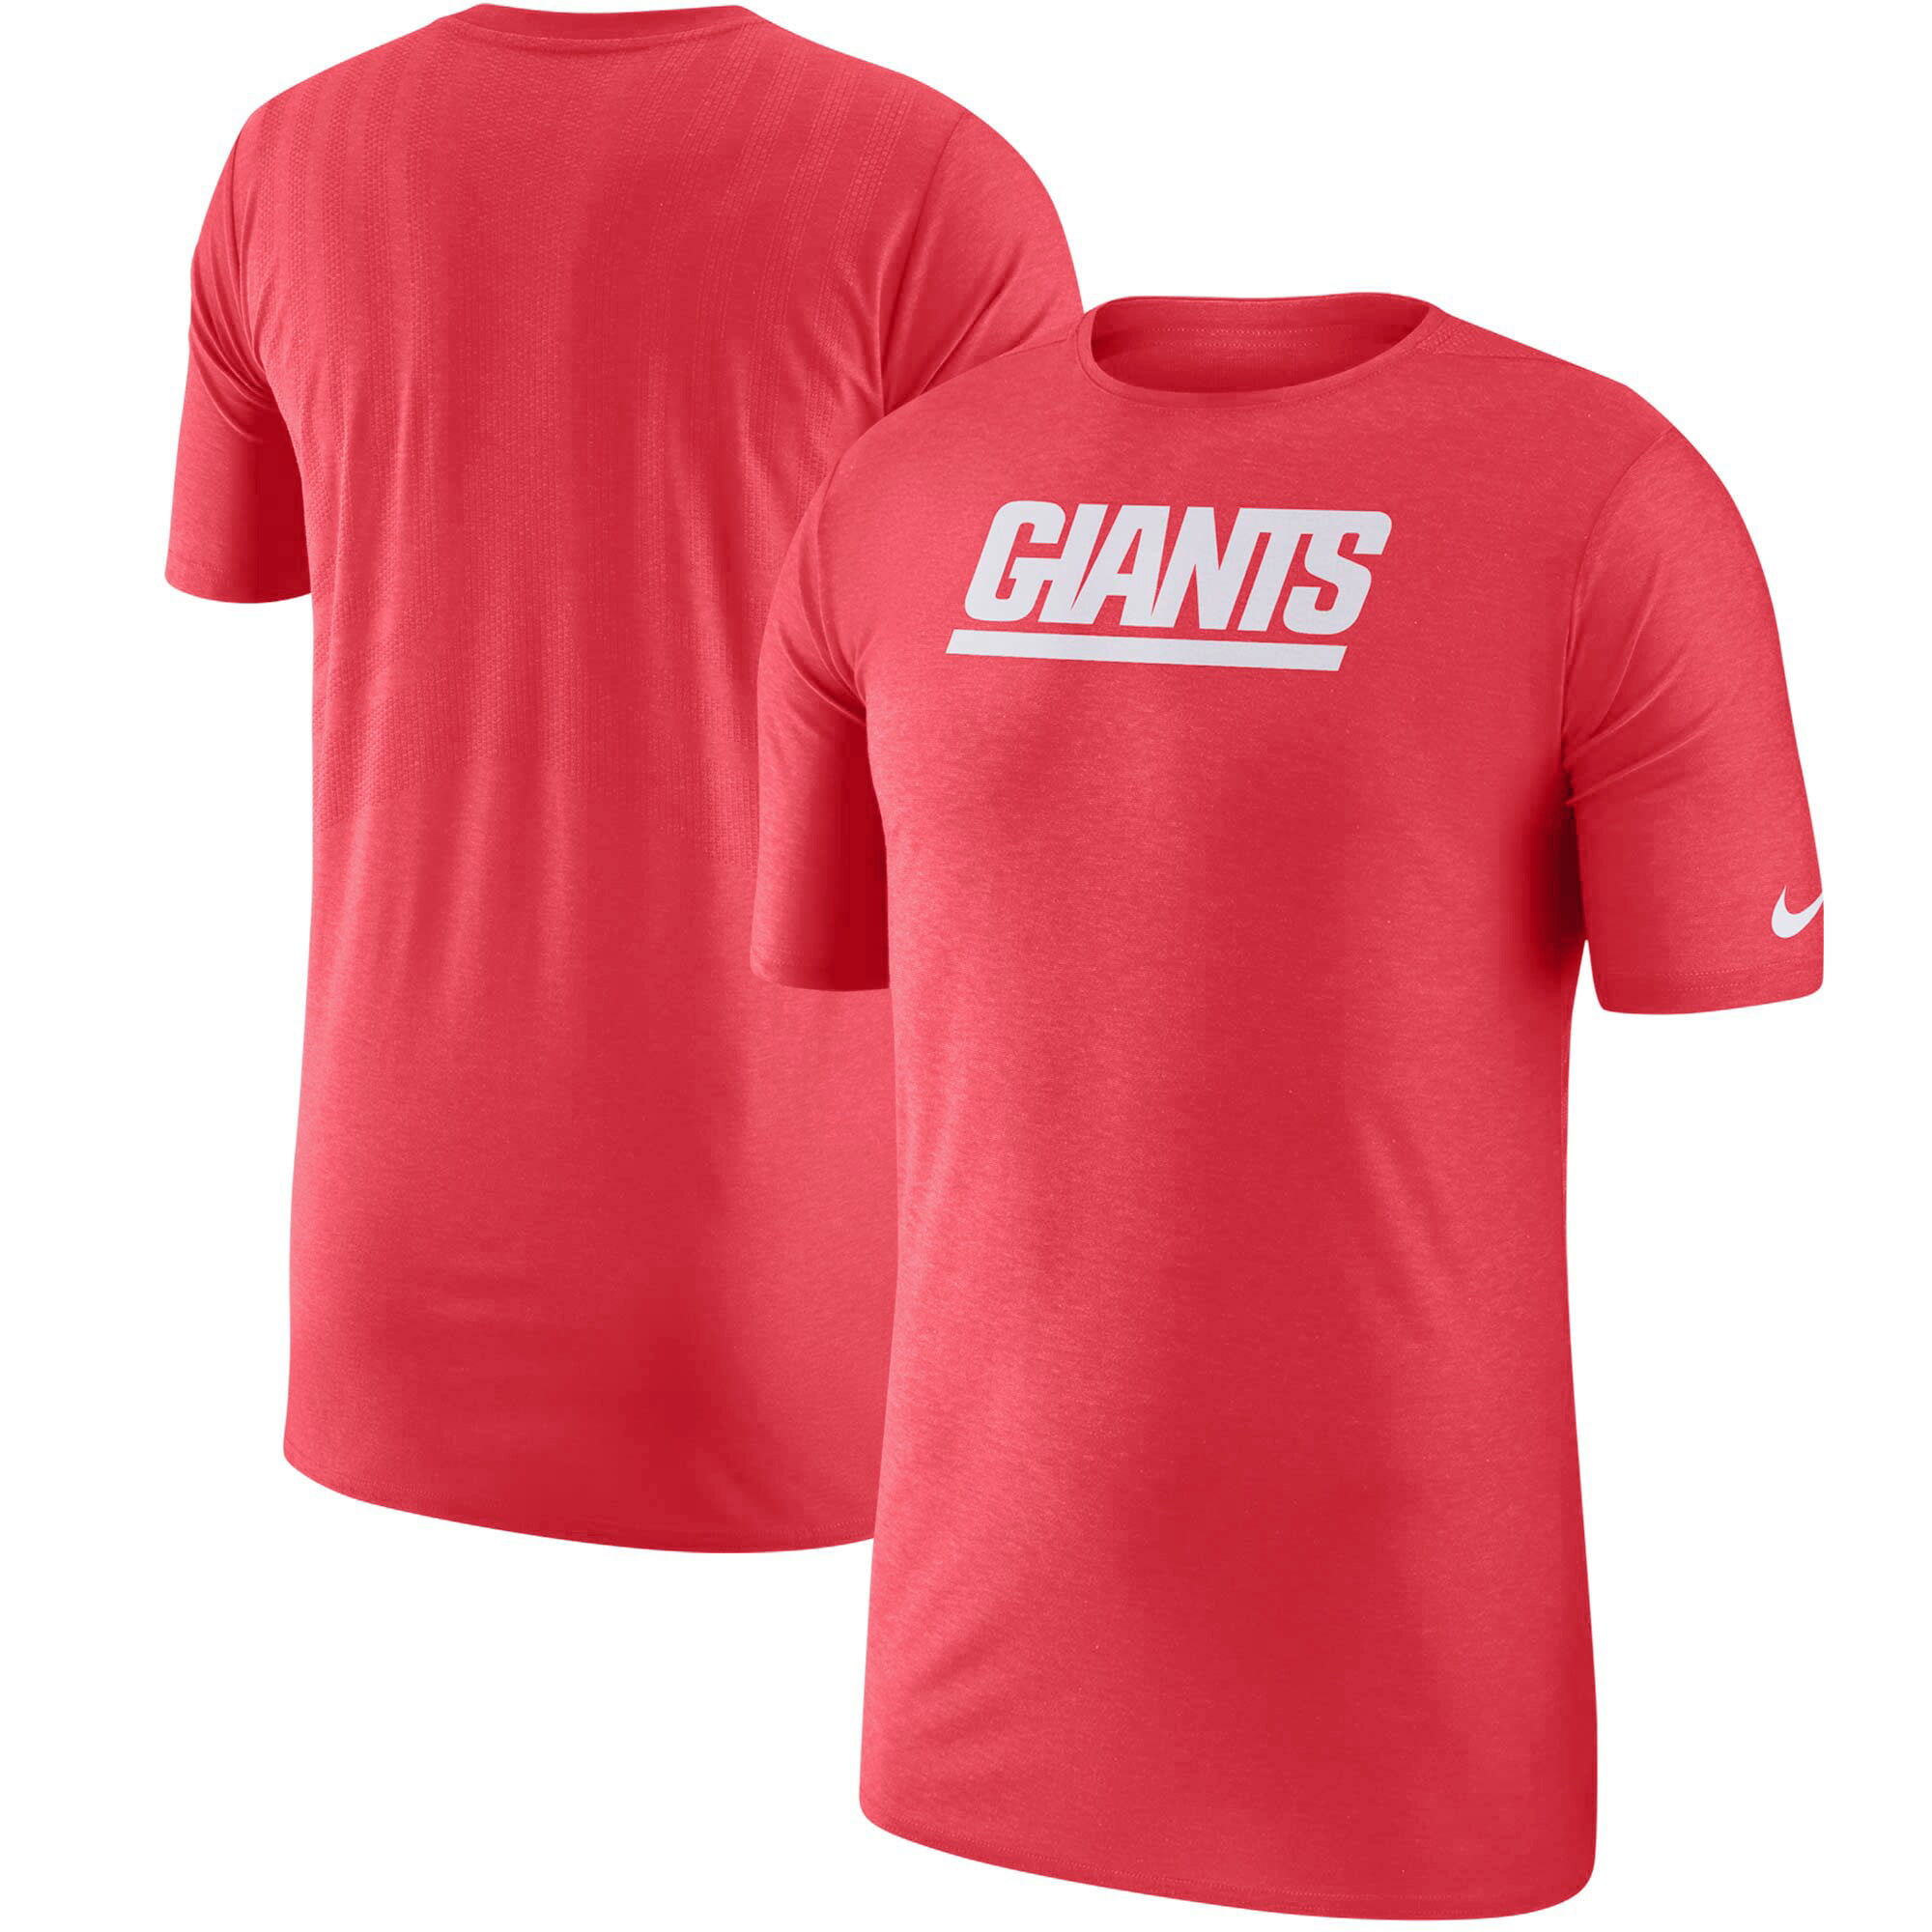 ny giants player t shirts